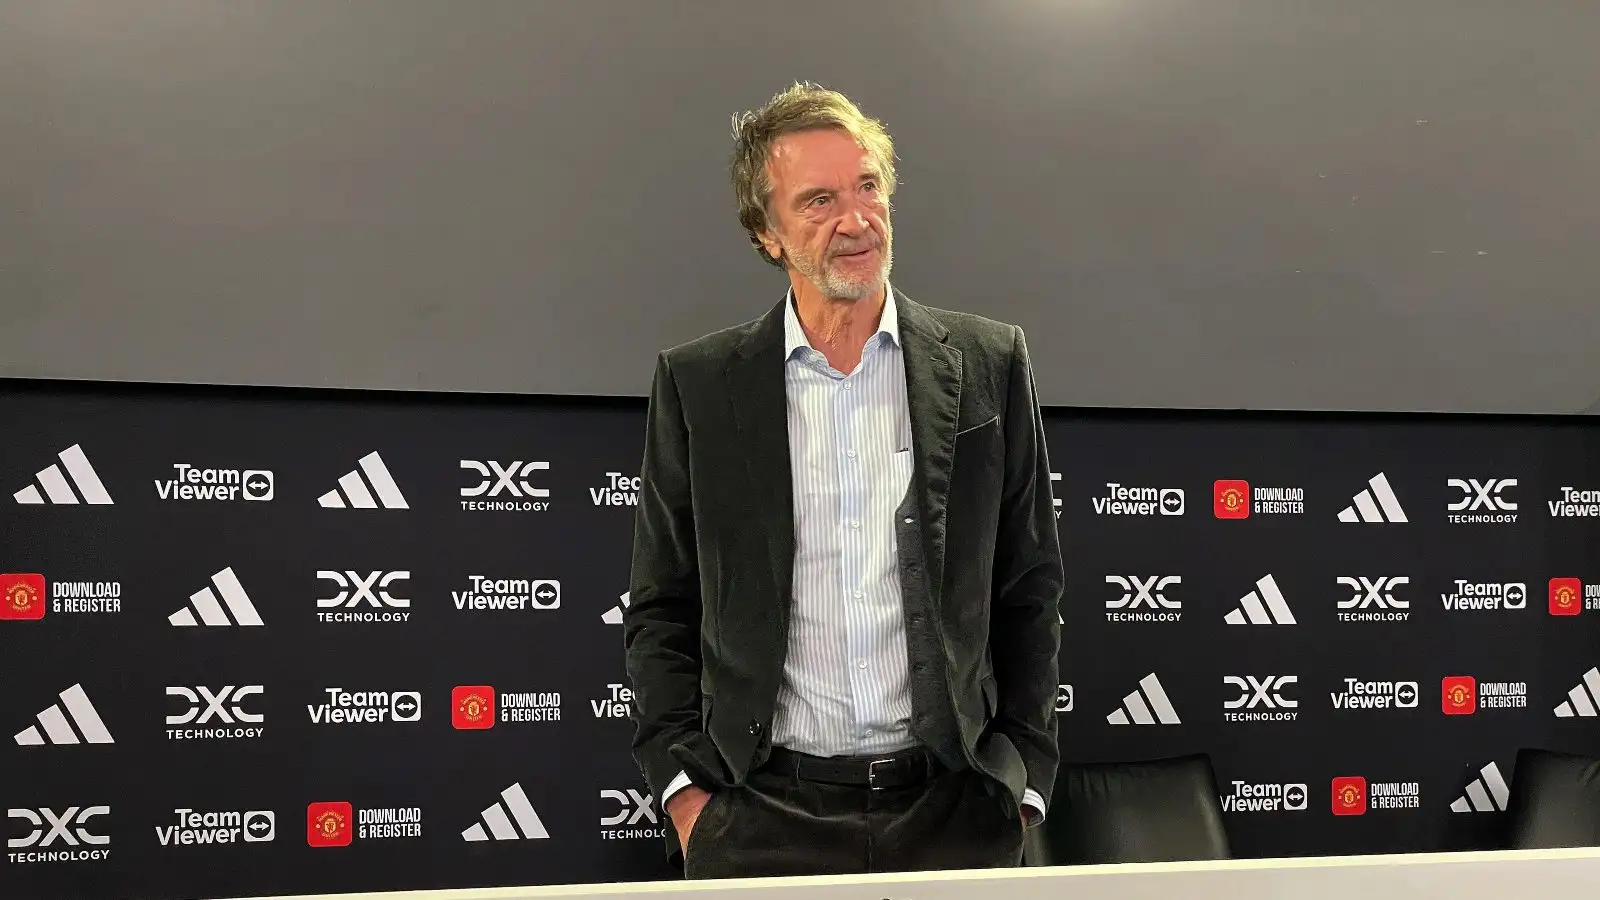 Male Utd co-owner Sir Jim Ratcliffe